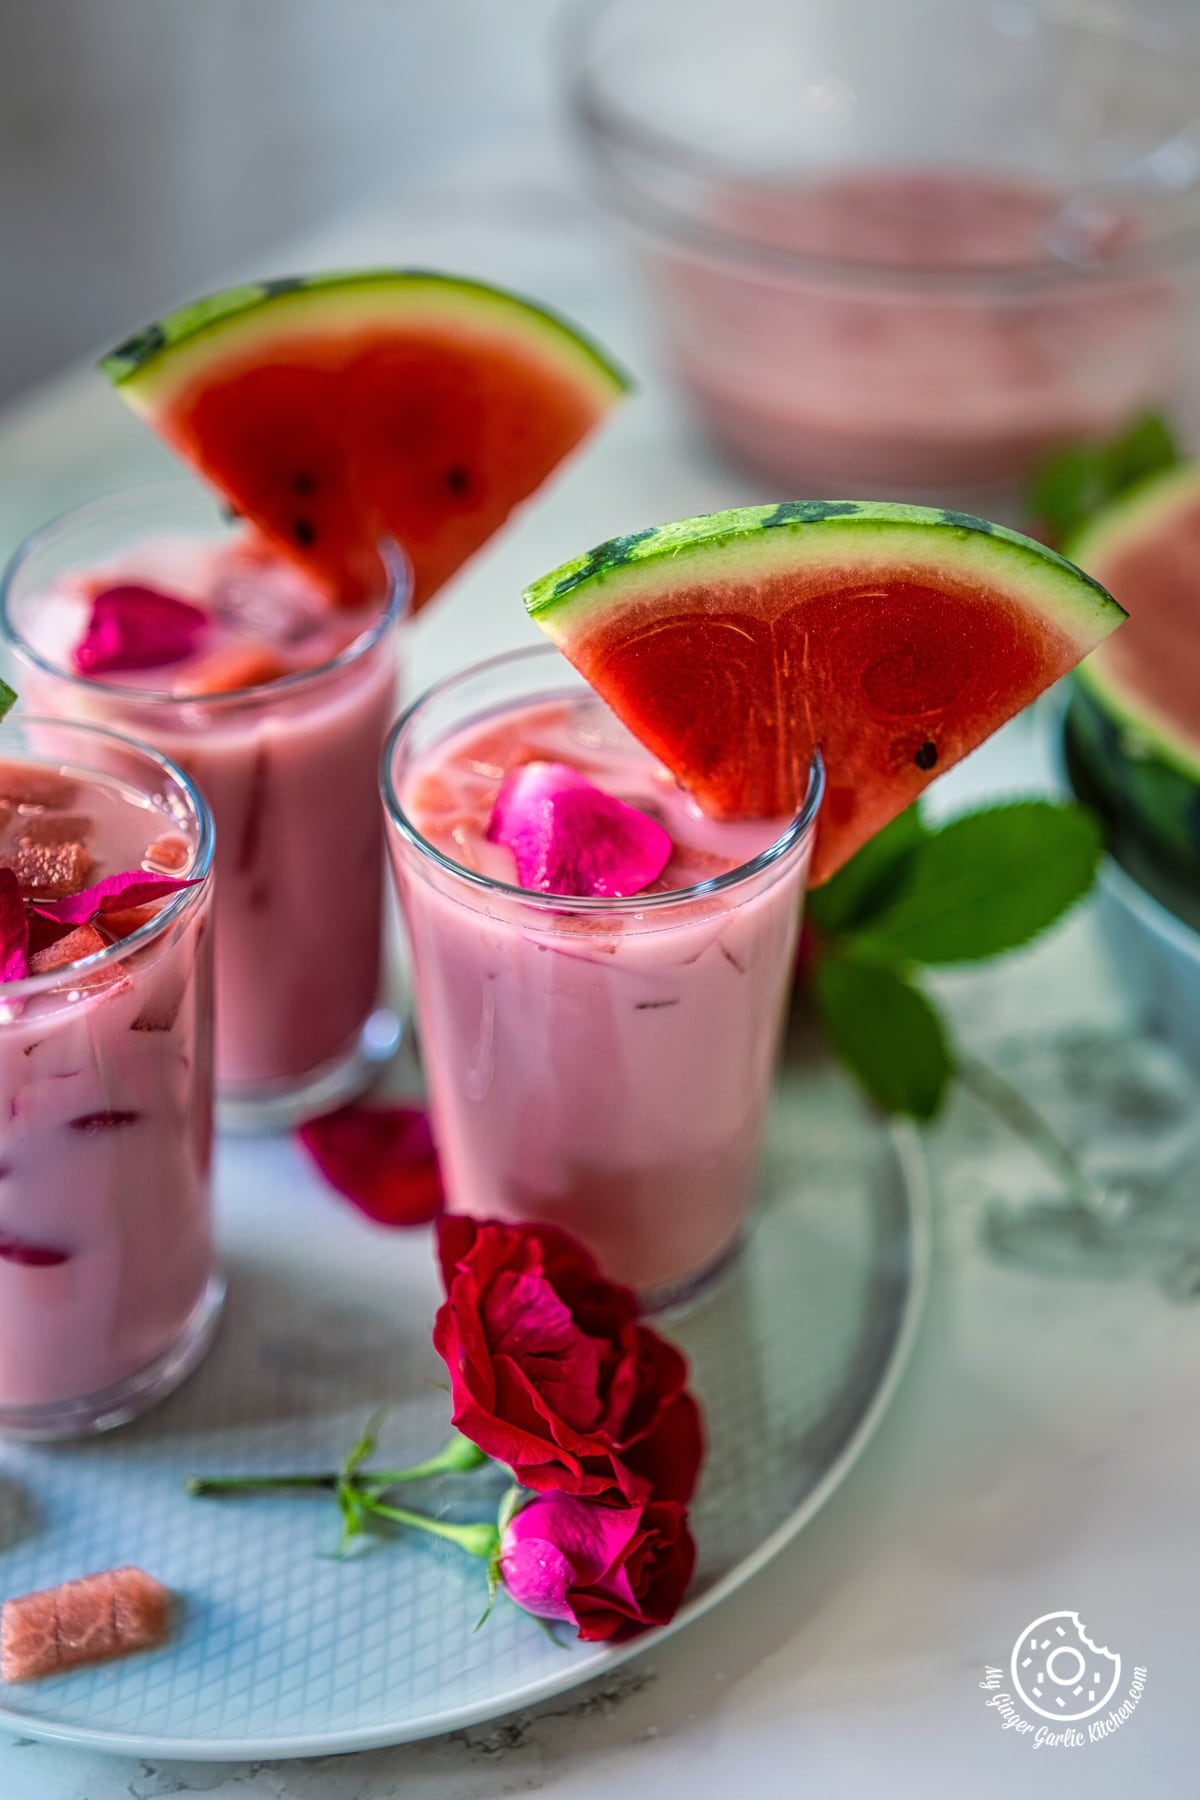 mohabbat ka sharbat glasses with garnished rose petals and watermelon slices